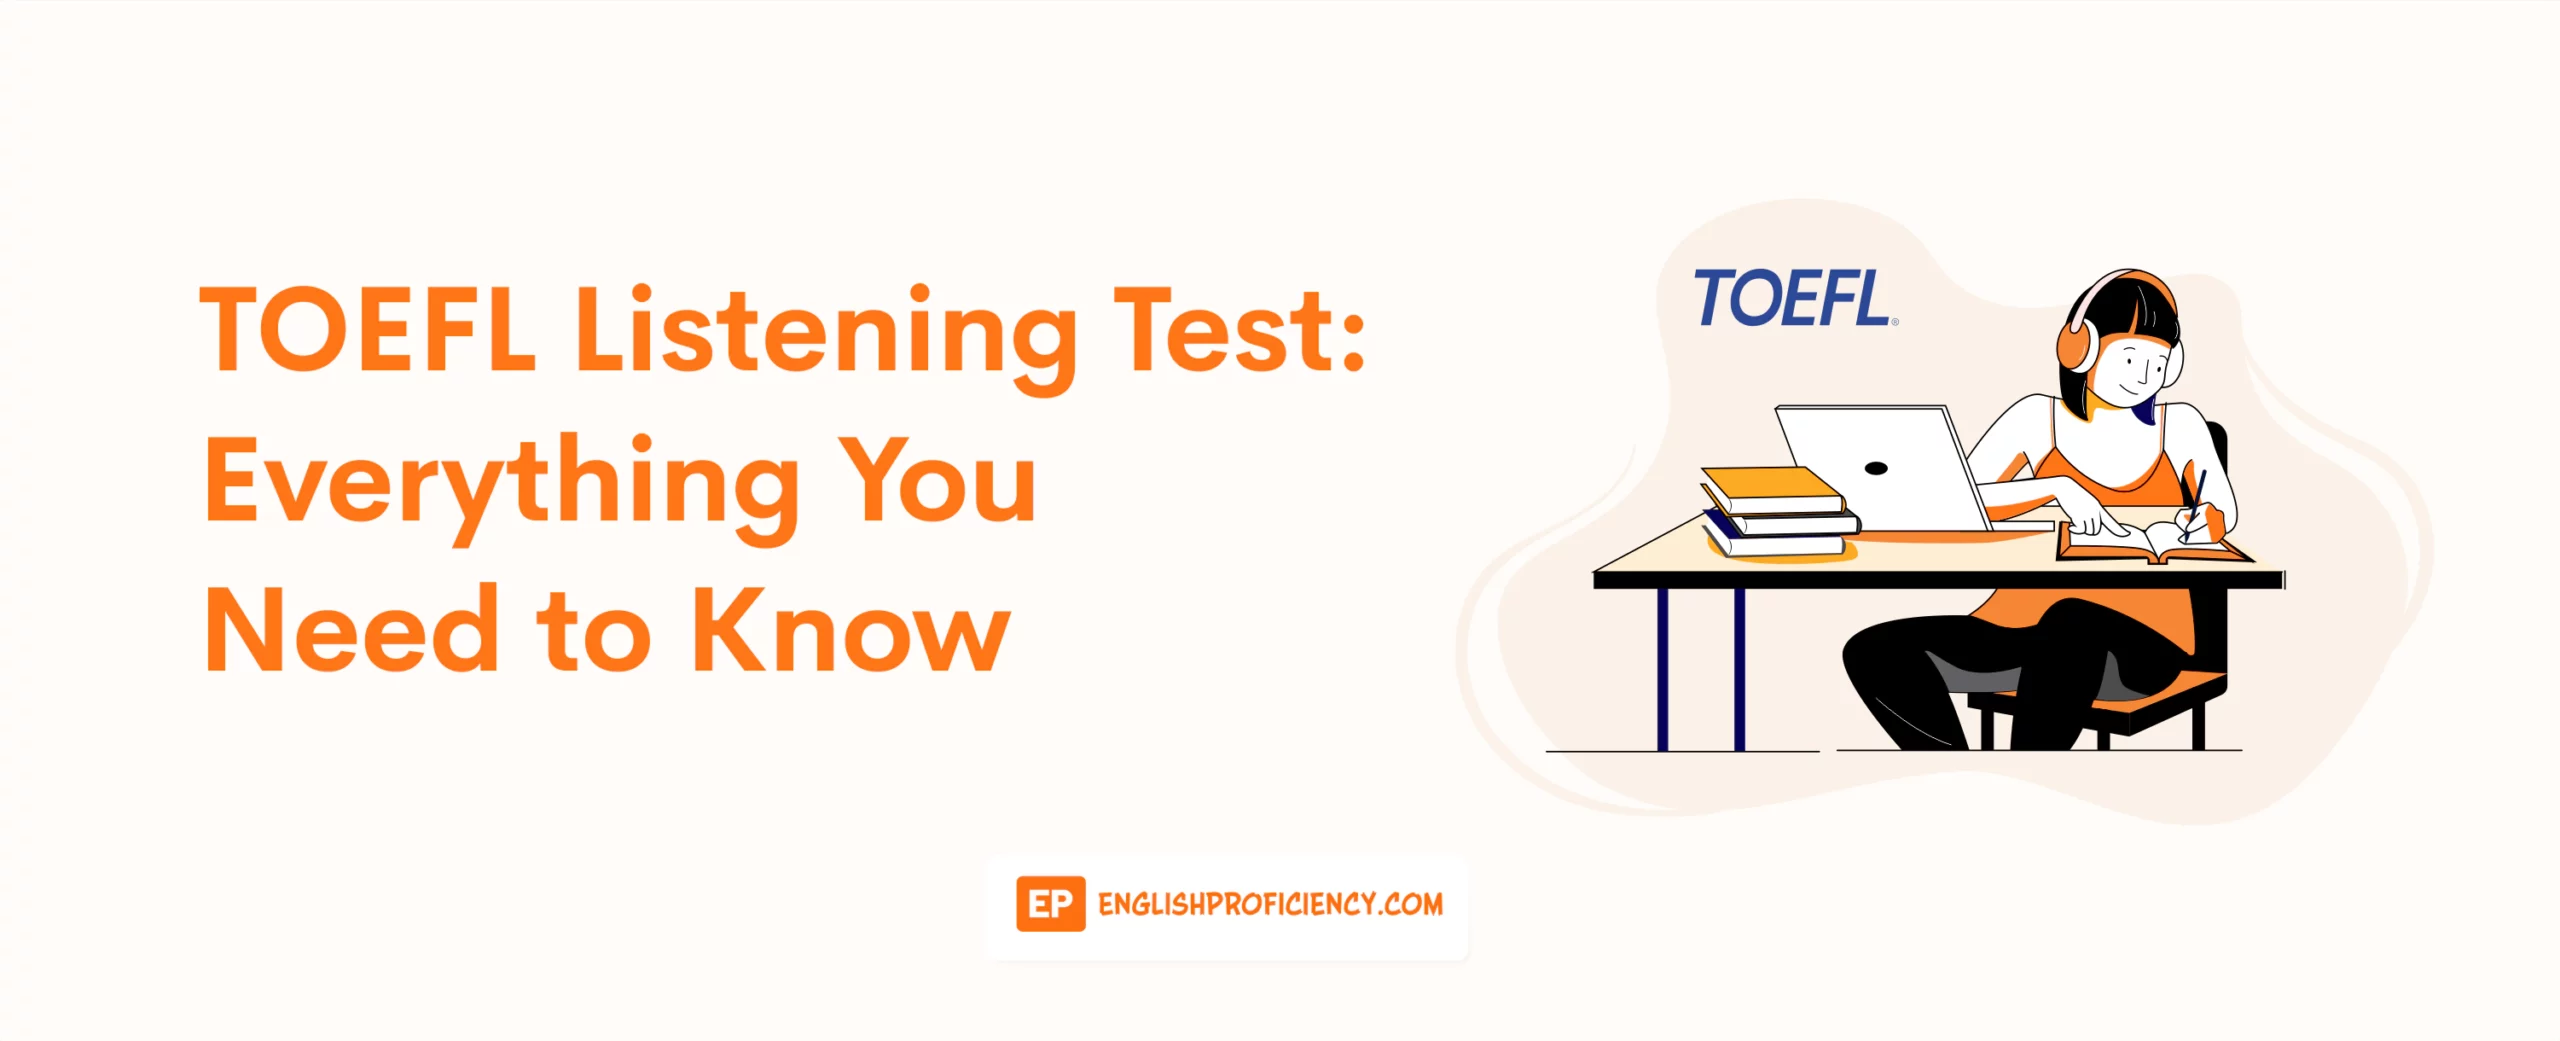 TOEFL Listening Test Everything You Need to Know